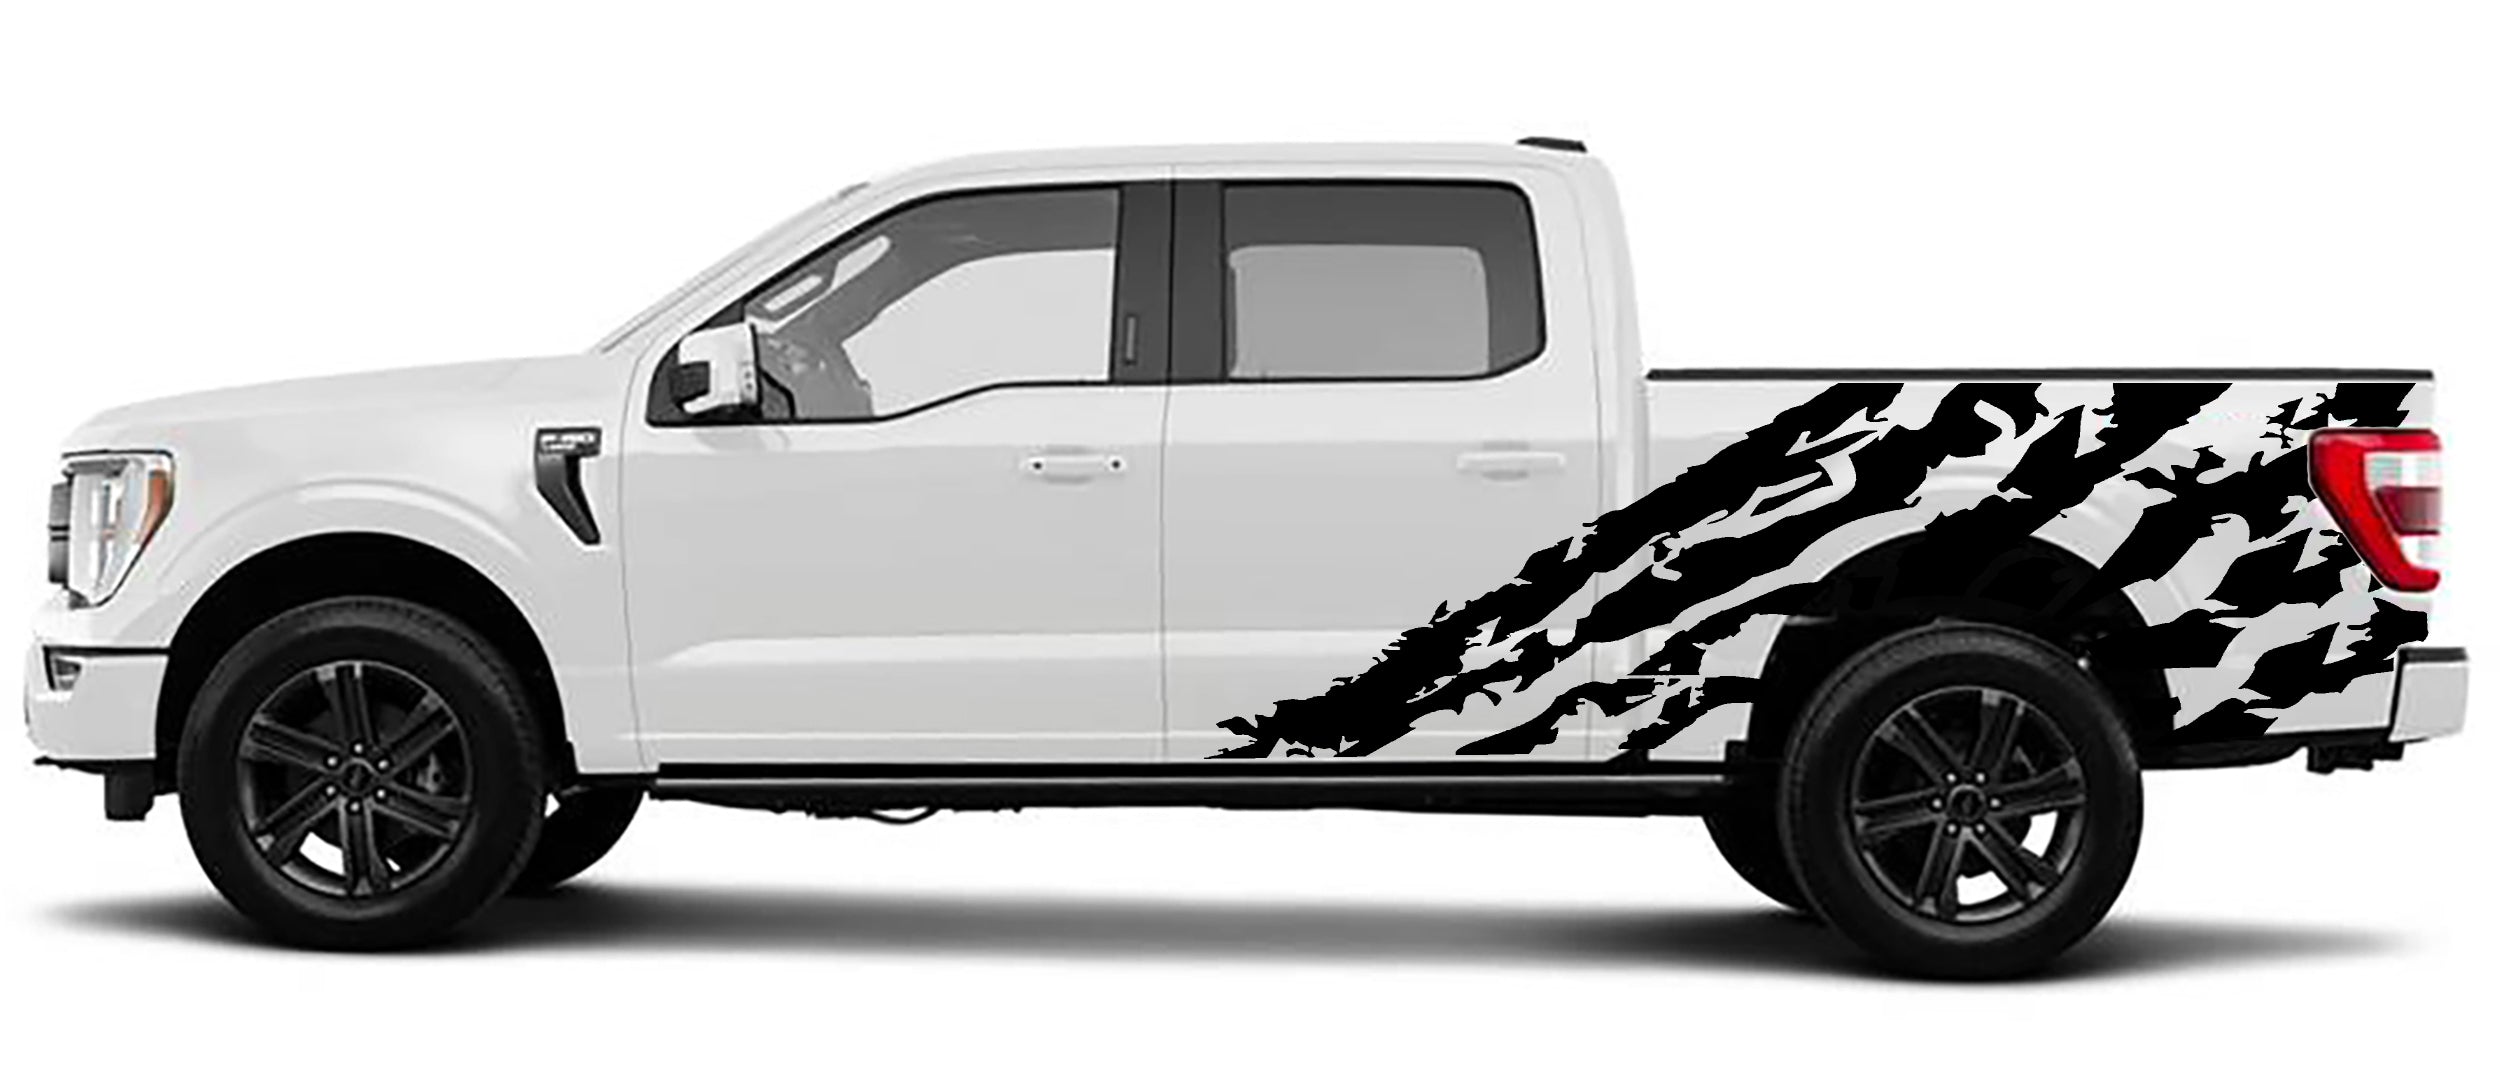 Shredded bed vinyl graphiFord F-150 Shred Bed Decals (Pair) : Vinyl Graphics Kit Fits (2021-2023)cs for 2021 to 2023 models black